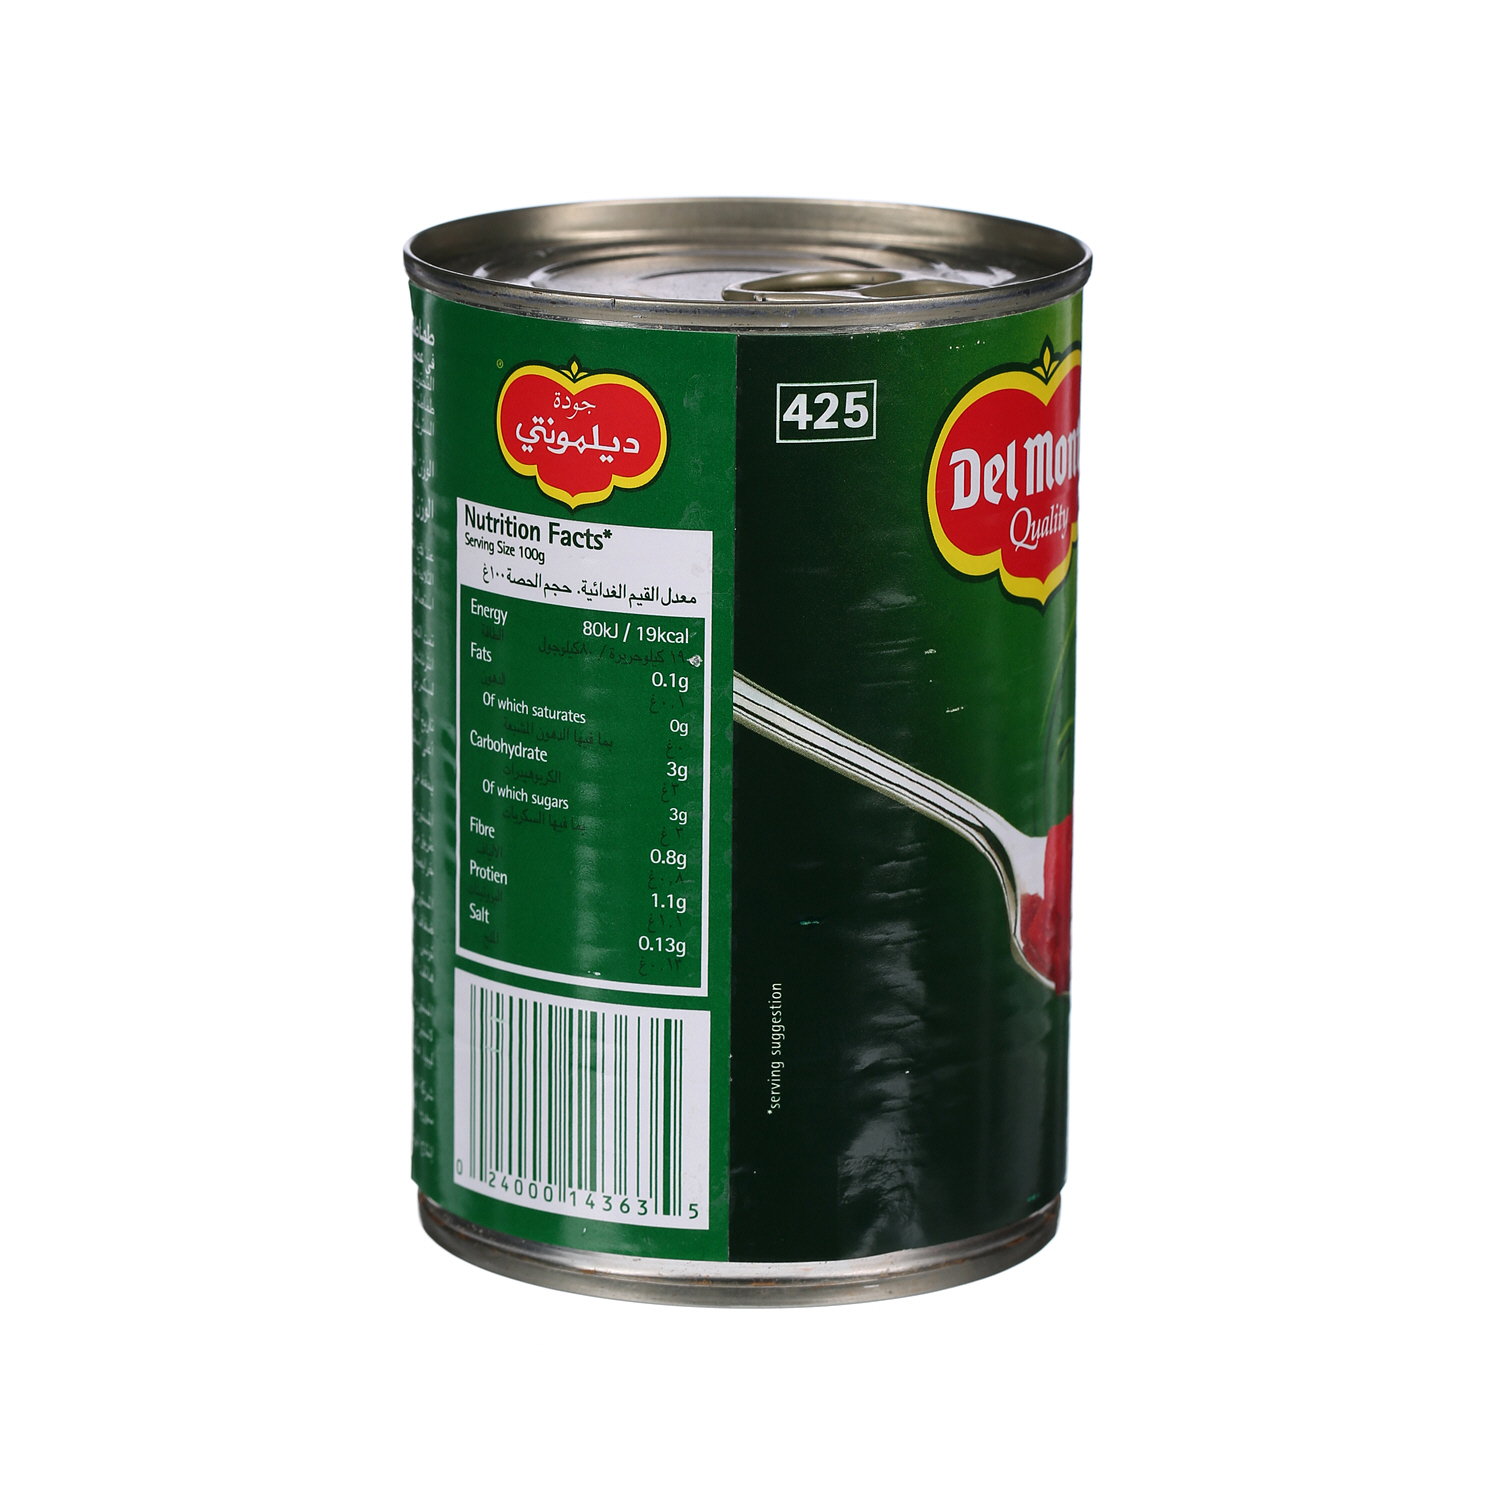 Del Monte Chopped Tomatoes 400 g